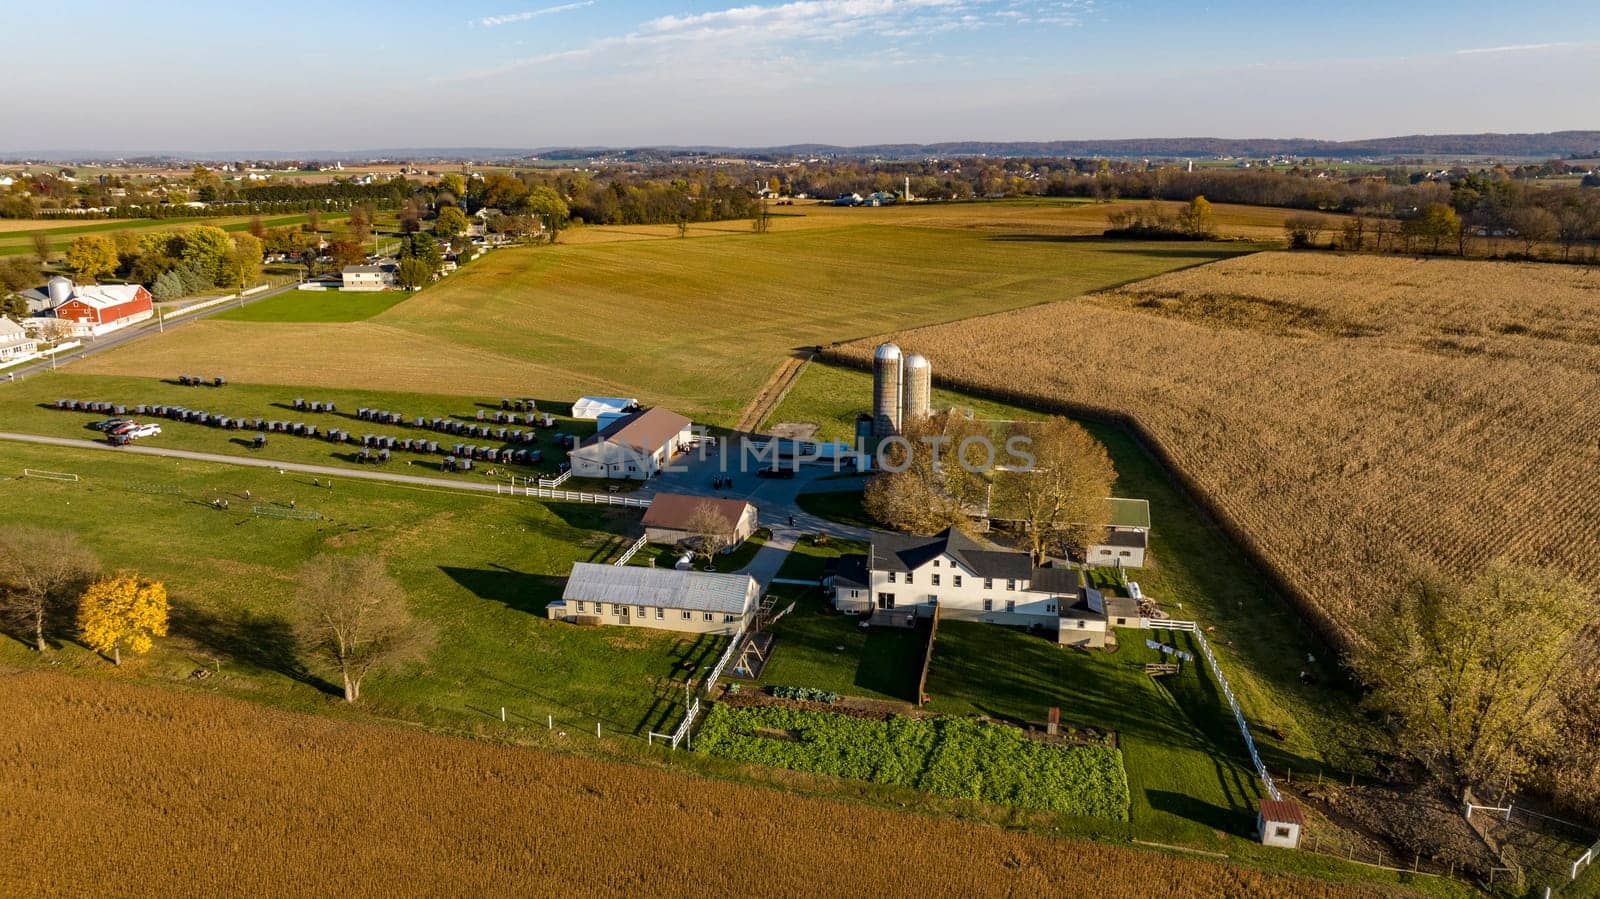 Ronks, Pennsylvania, November 7, 2023 - As the sun sets, this aerial view highlights a farm after the harvest, with its distinctive silos and buildings, embodying the essence of rural life and the agricultural cycle. having an Amish wedding